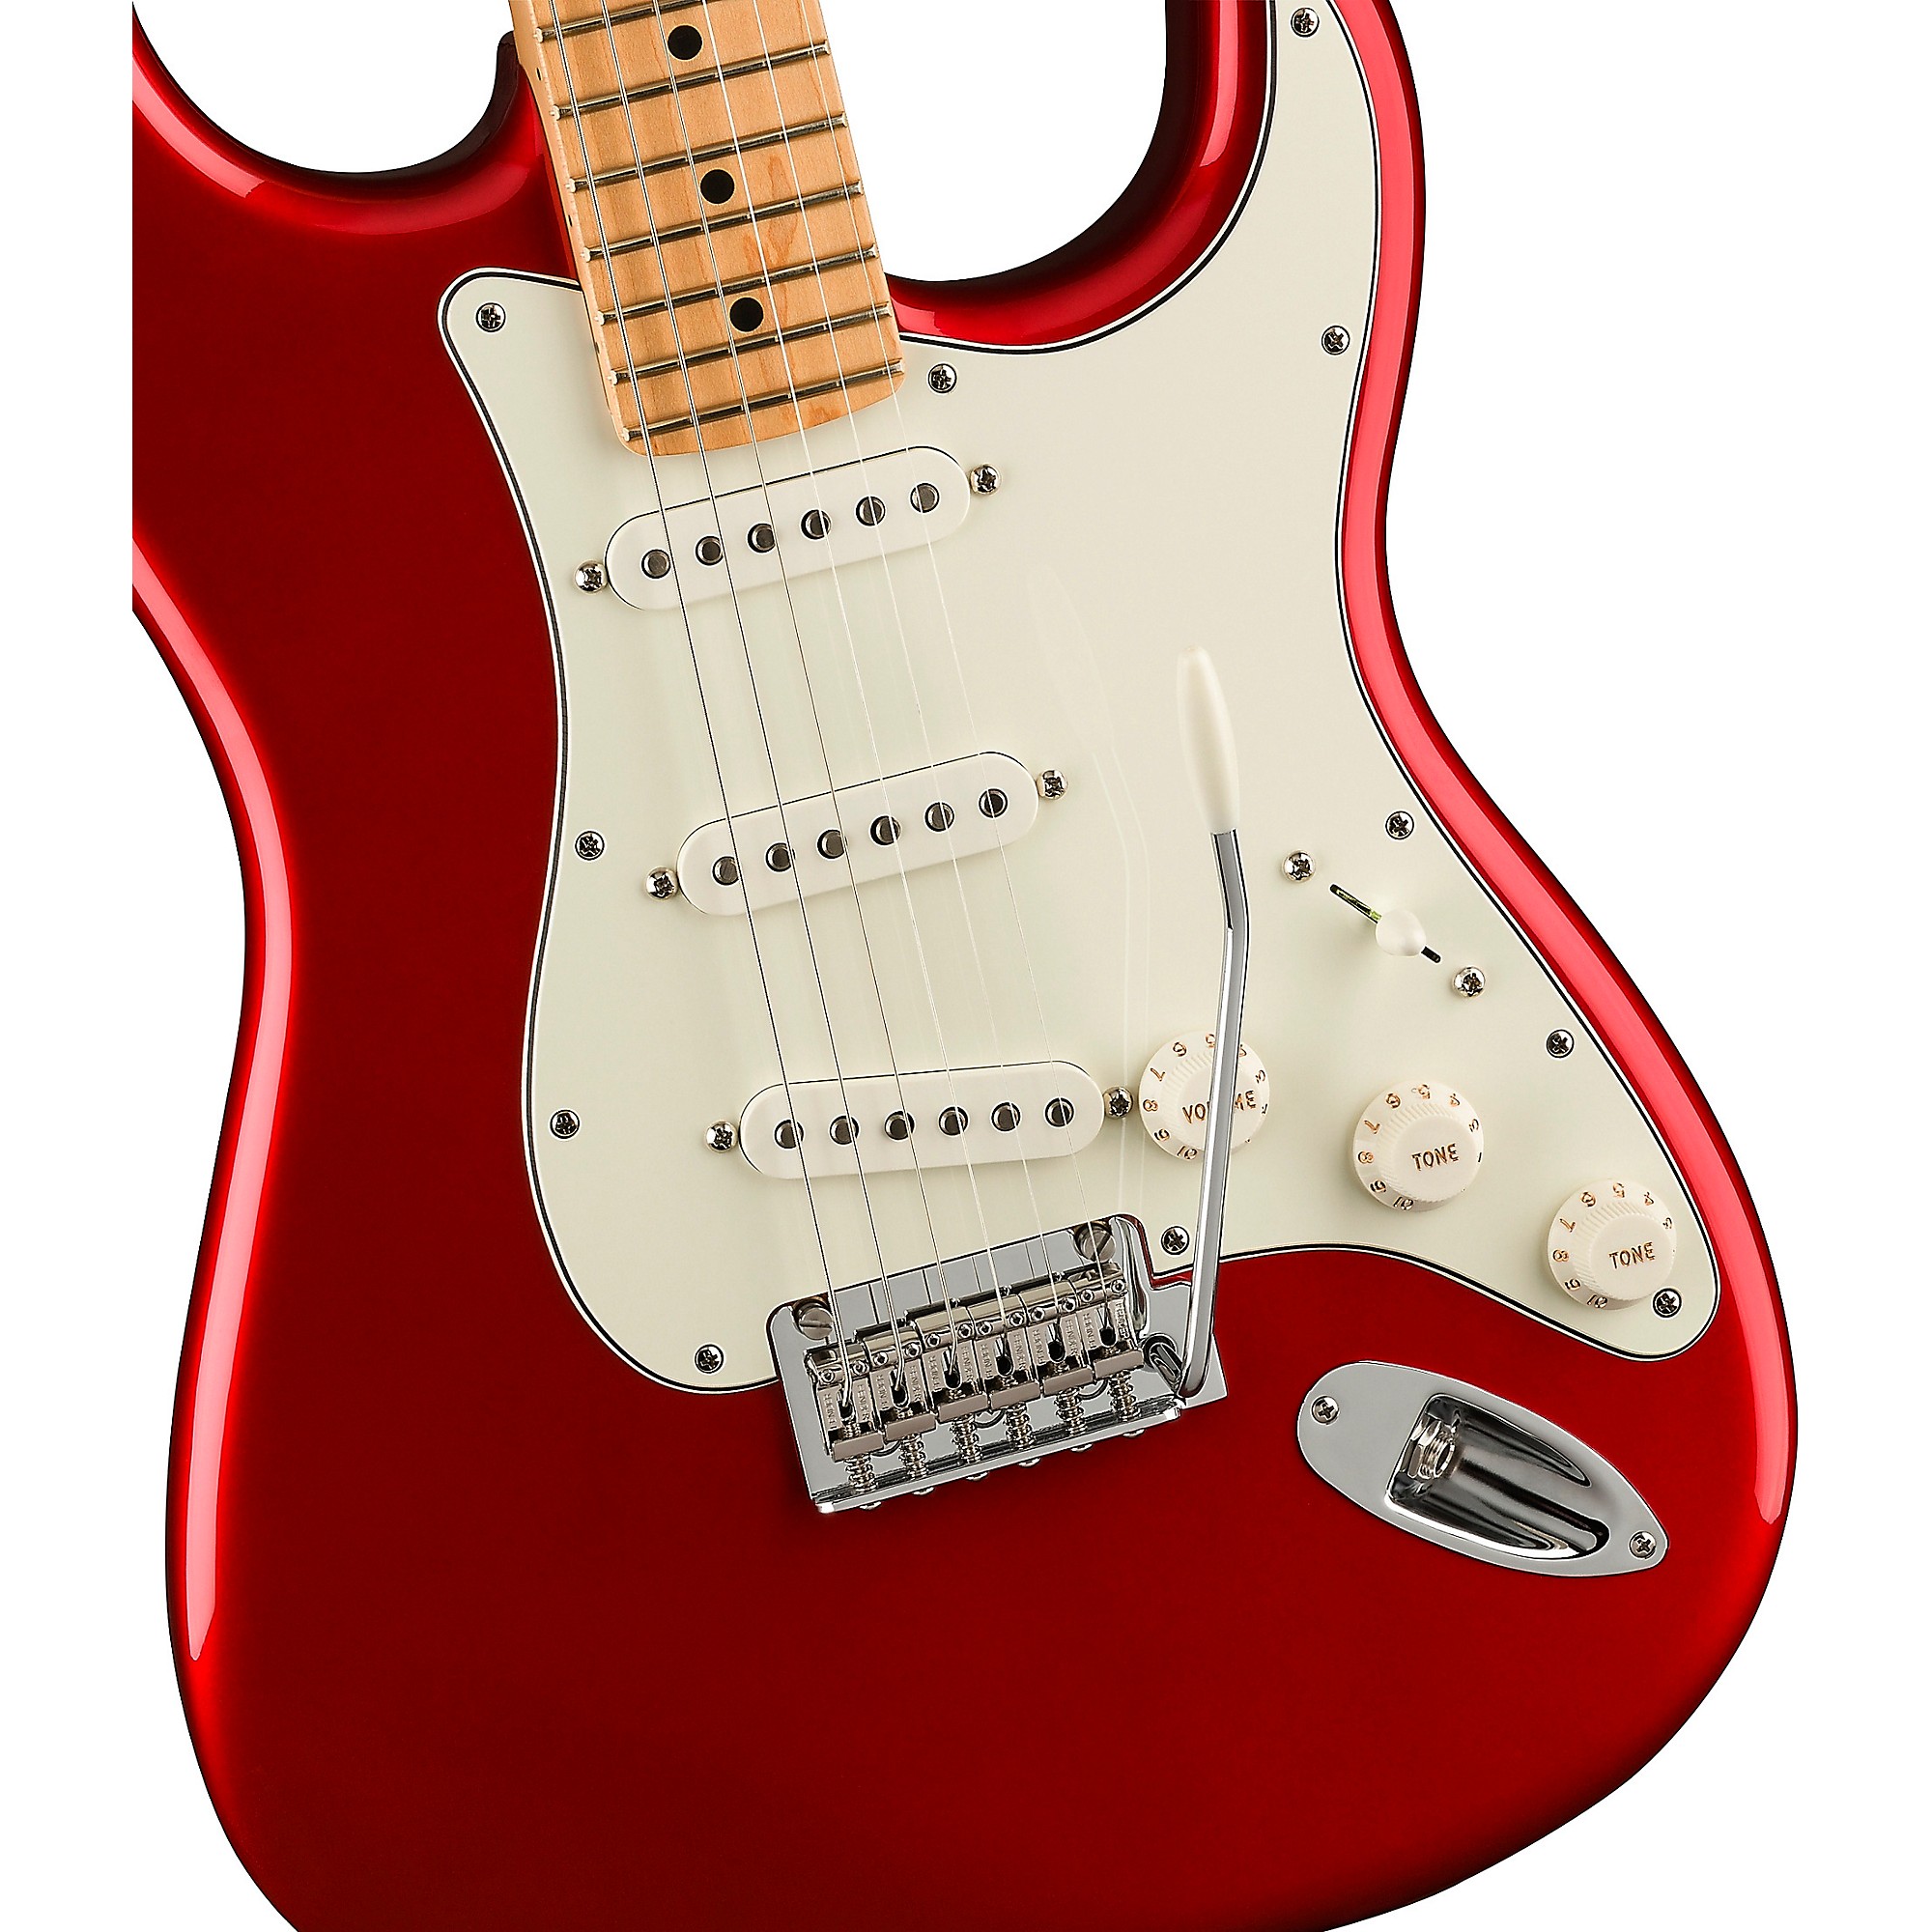 Fender Series Stratocaster Maple Fingerboard Electric Guitar Candy Apple Red | Guitar Center